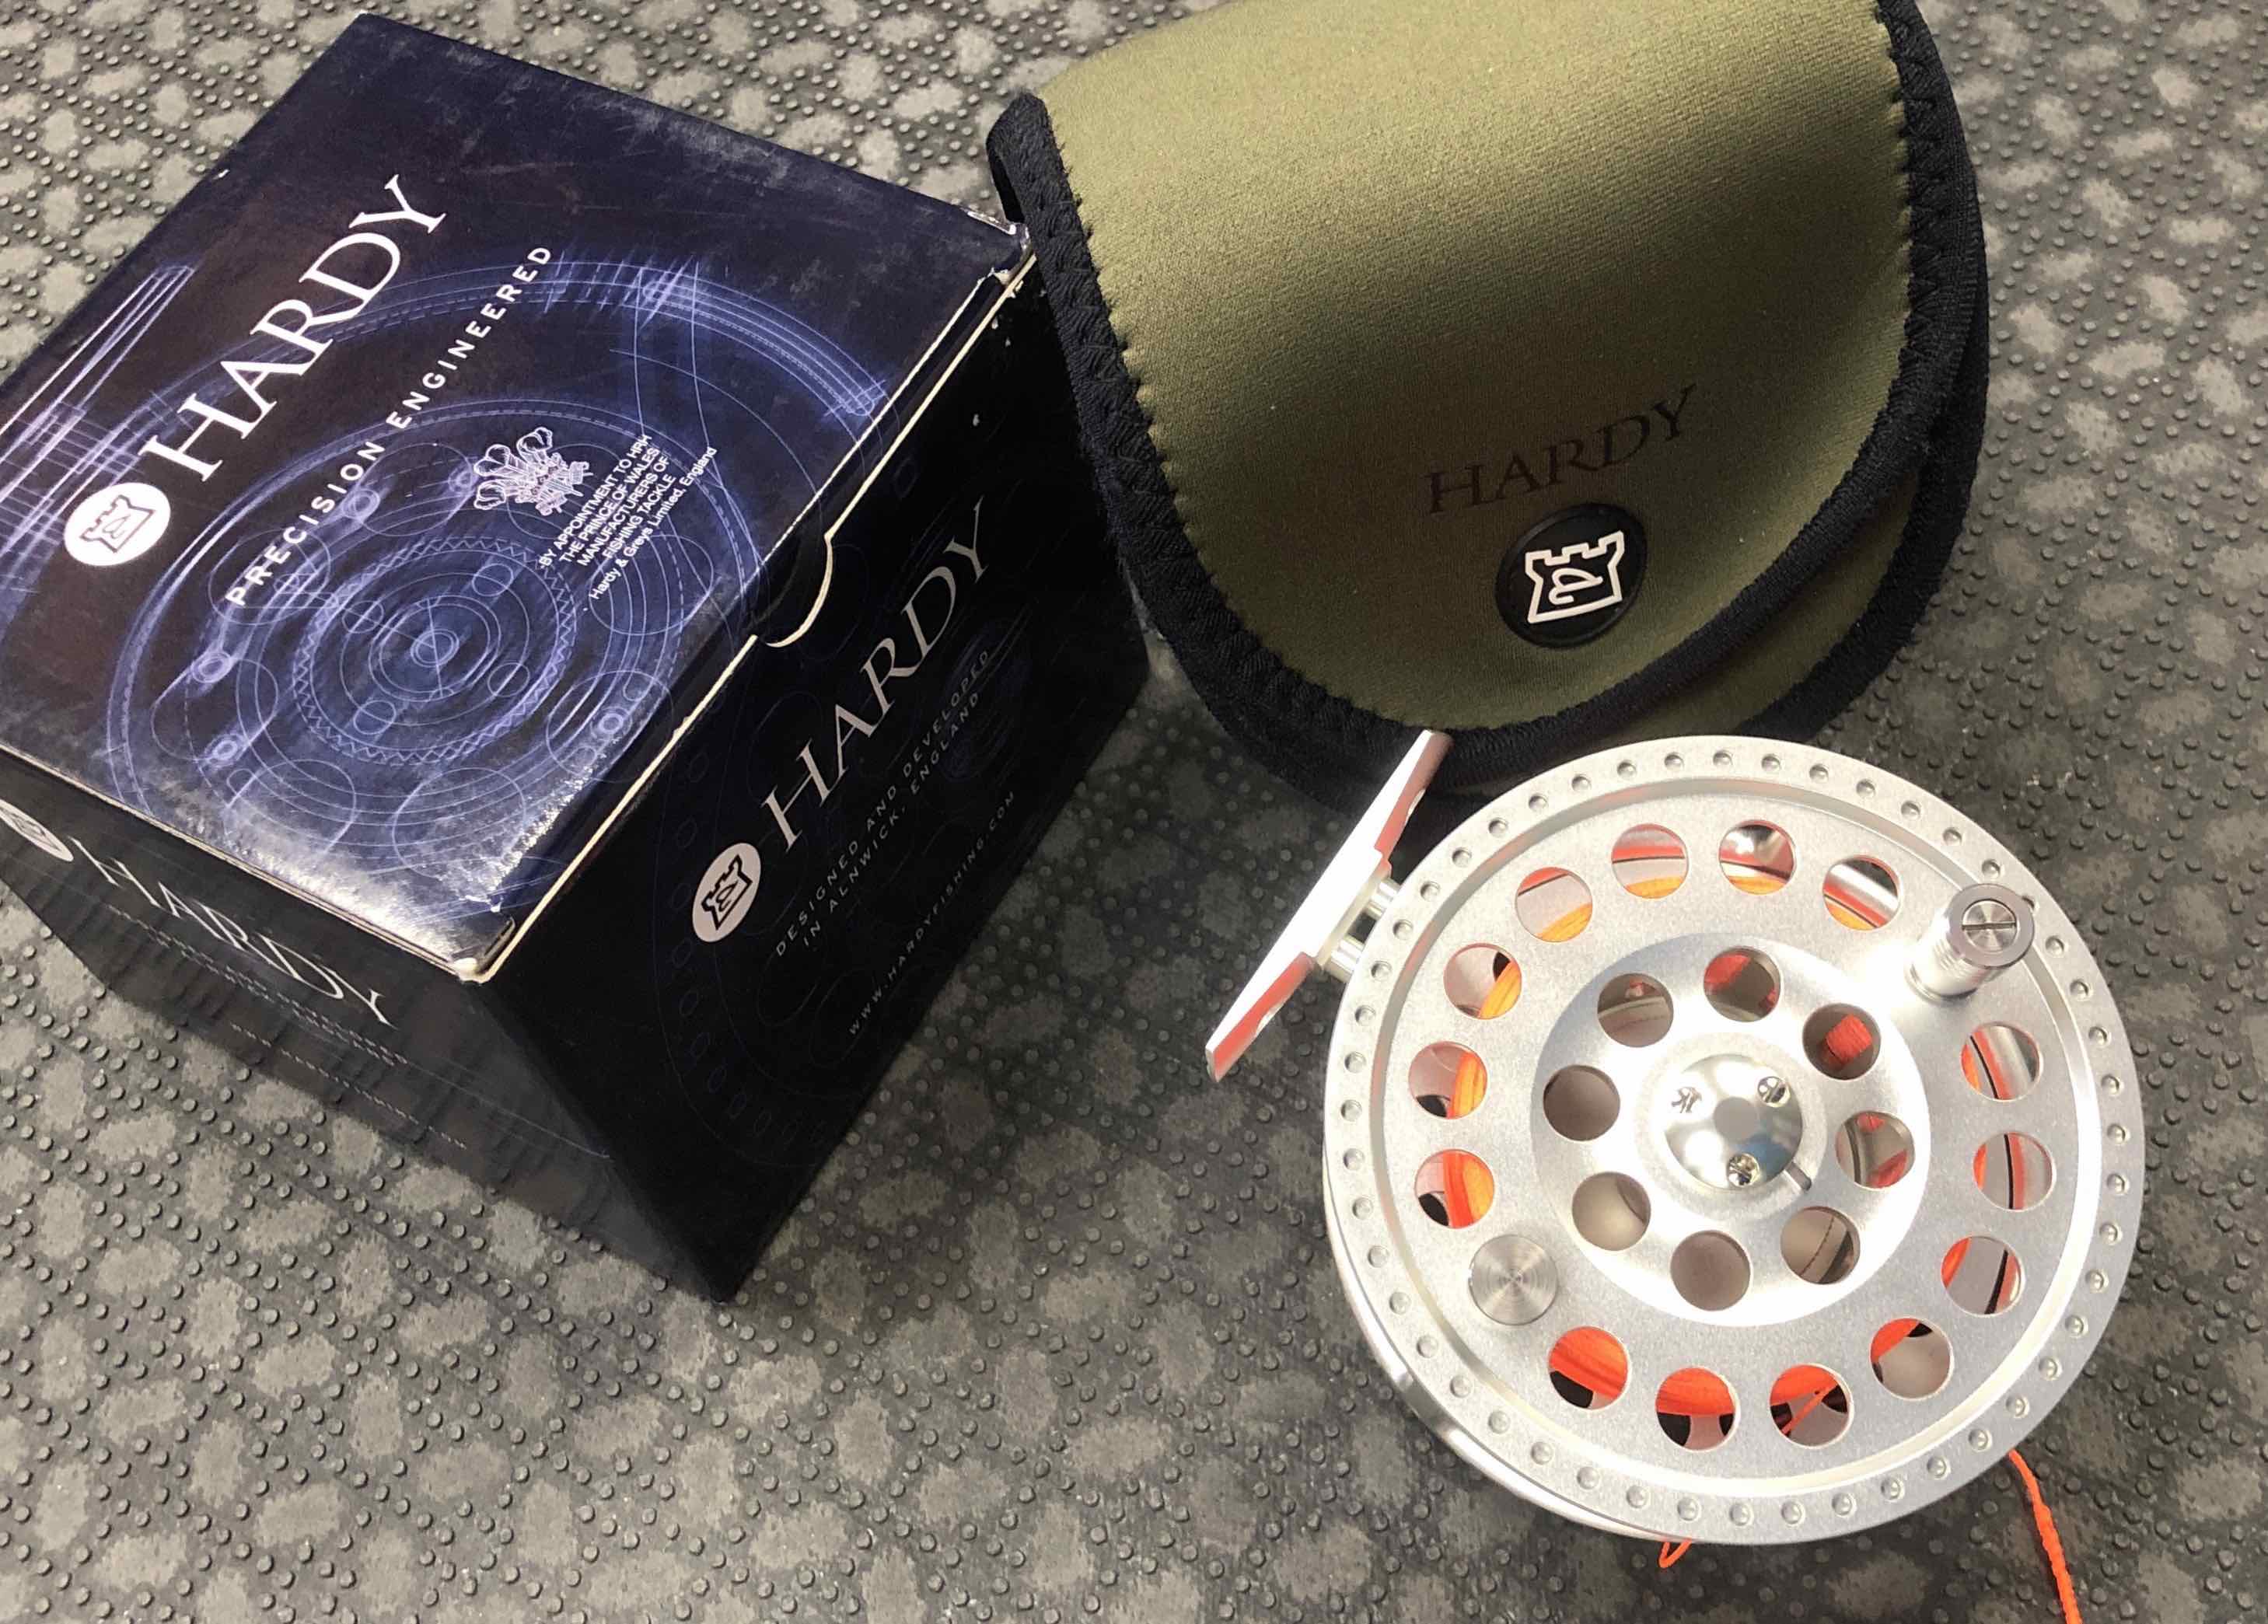 Hardy Angel 2 - 11/12 Spey Reel - C/W Pouch & Box - MINT CONDITION! - $395